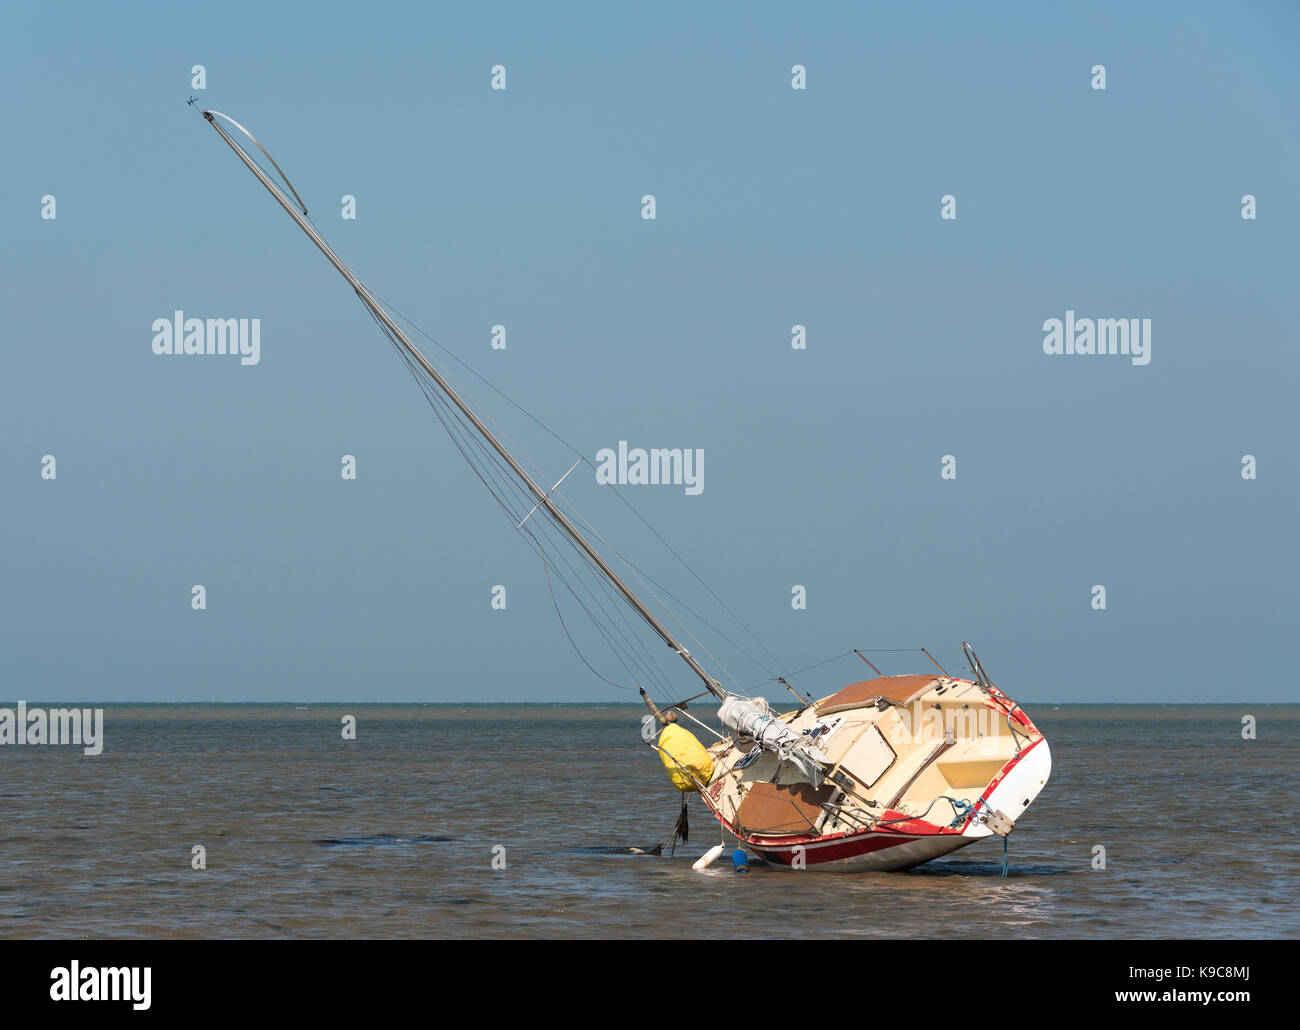 Sailing boat at low tide resting on its side Stock Photo